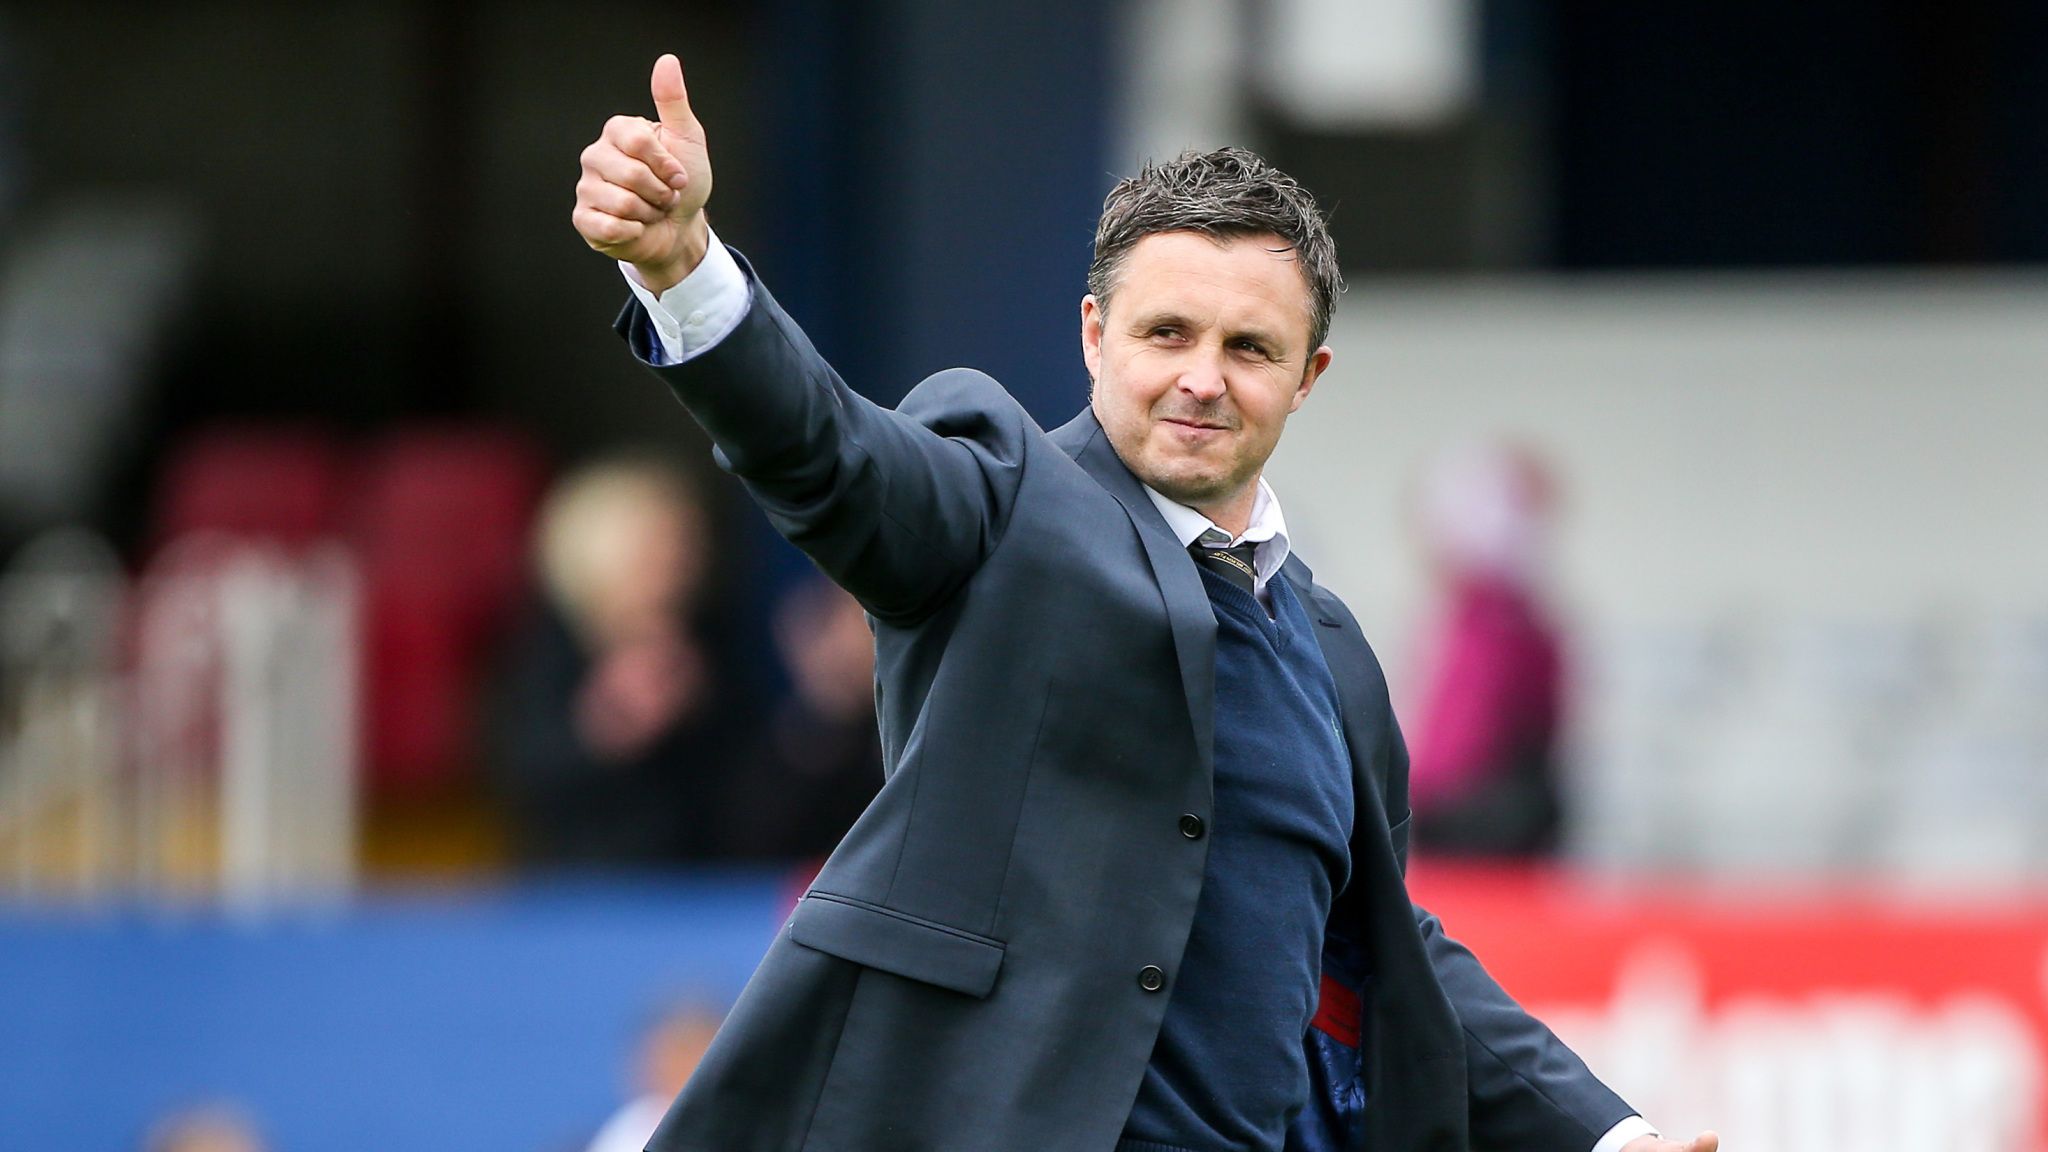 Paul Rowley resigns as coach of Leigh Centurions | Rugby League News | Sky Sports